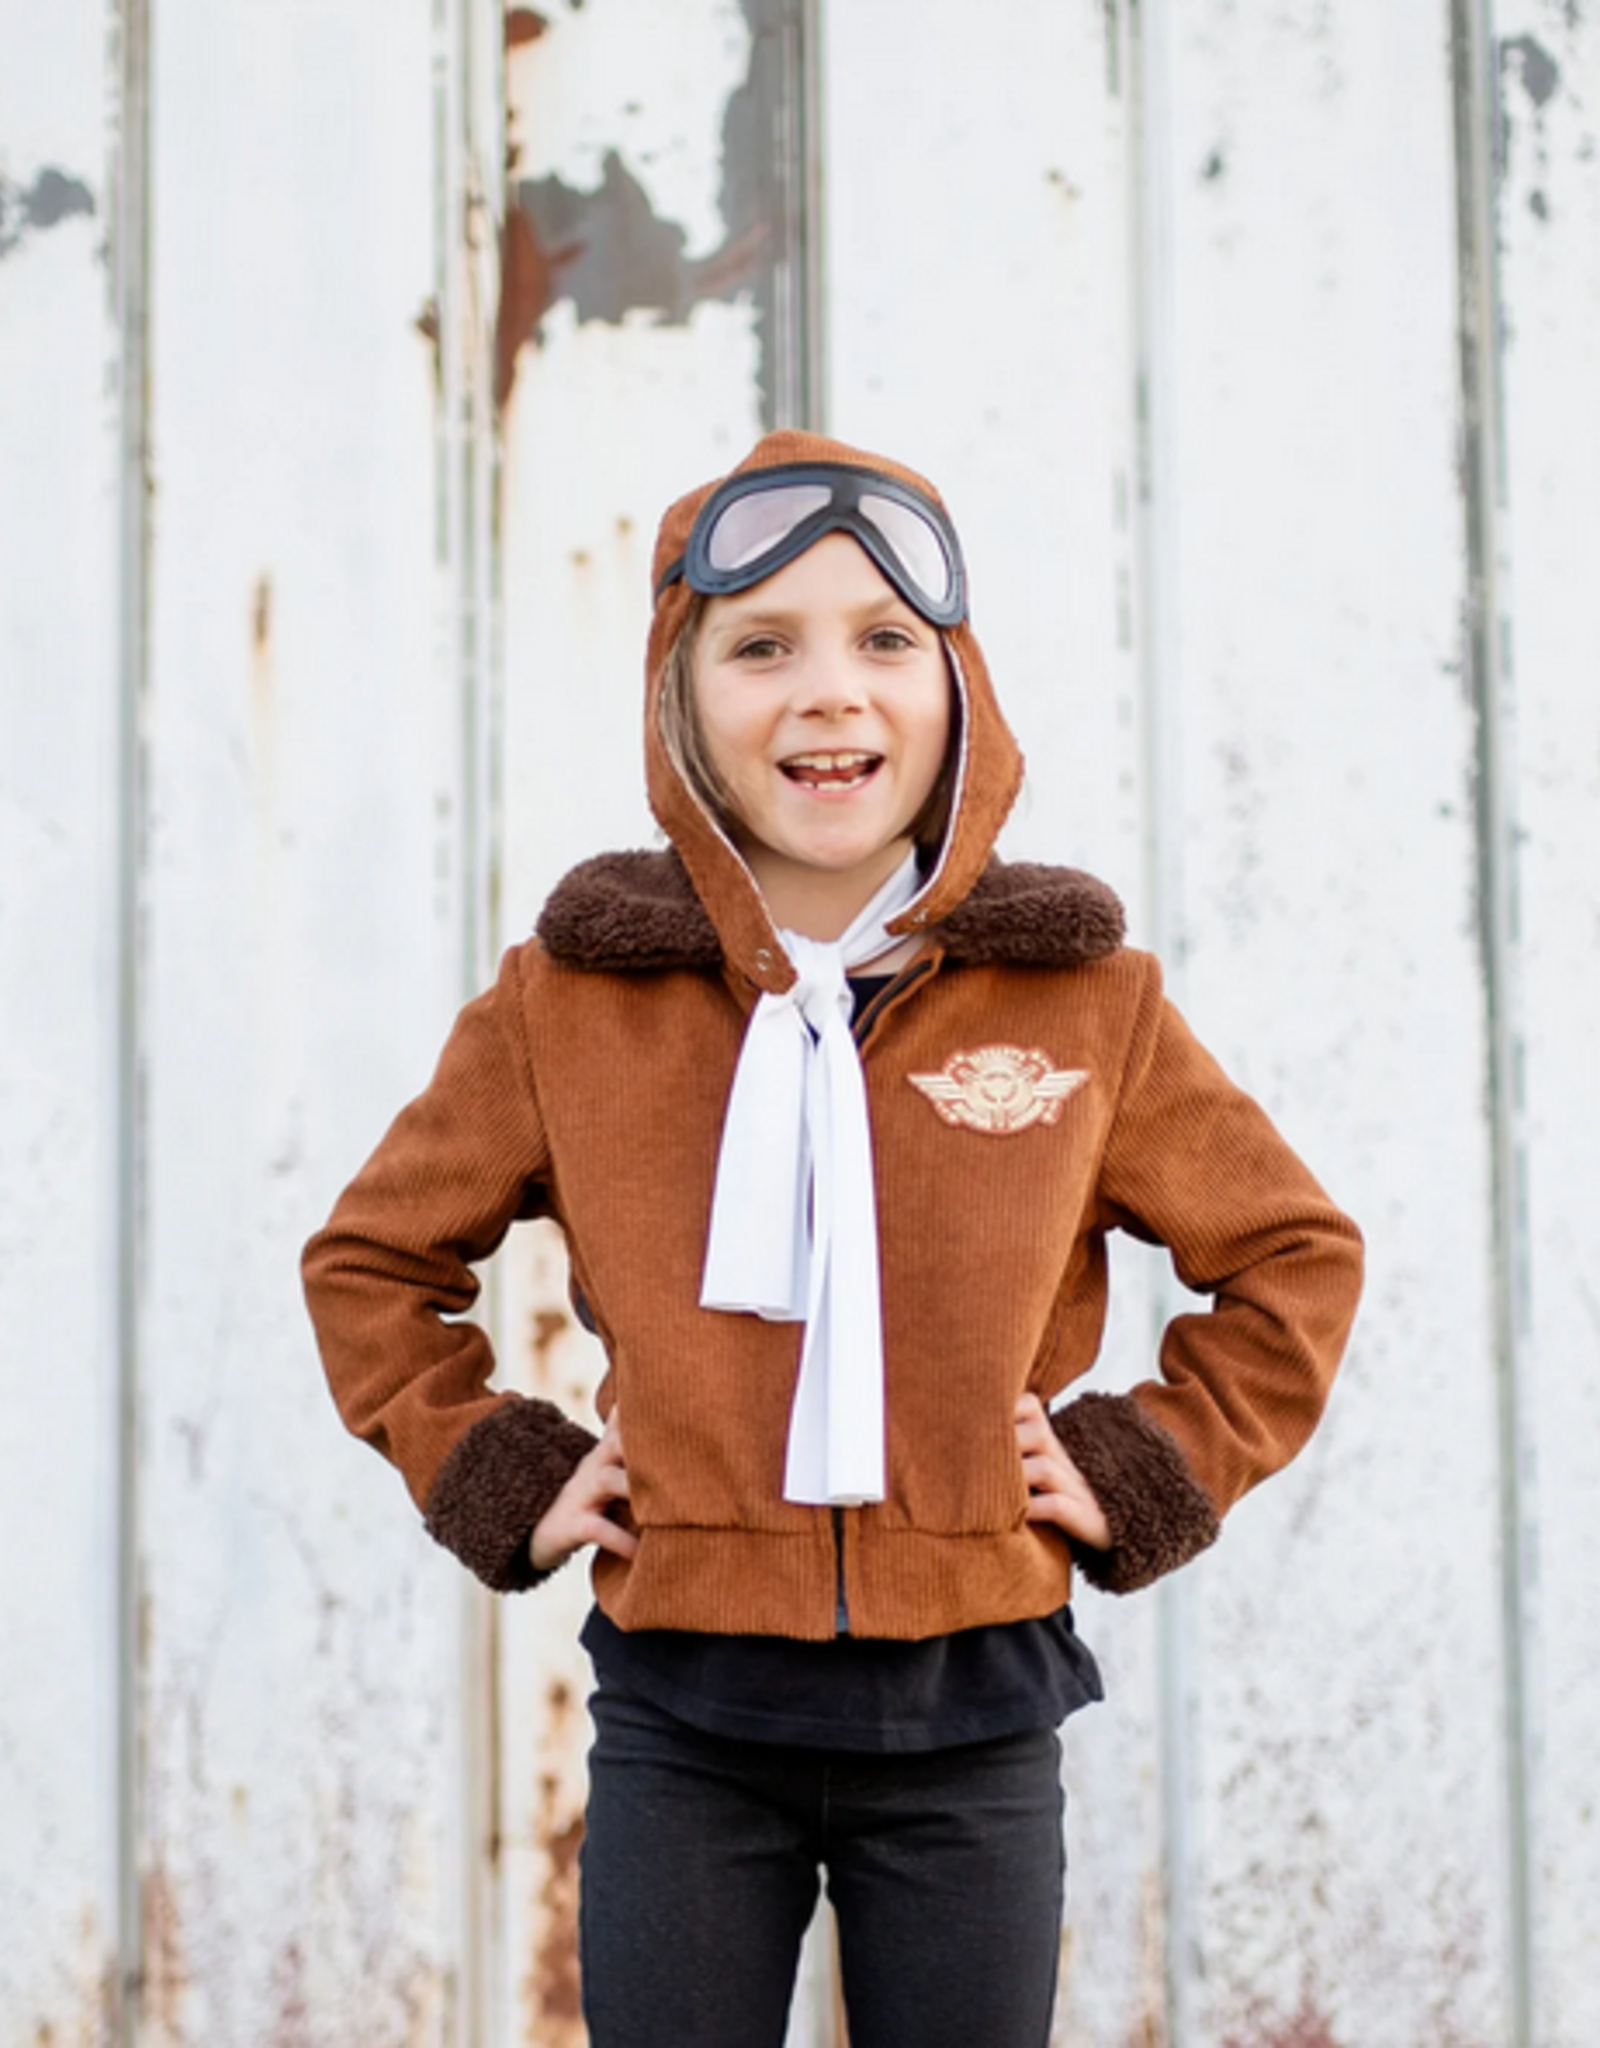 Creative Education Amelia The Pioneer Pilot Jacket, Hat, Goggles, Scarf, size 5-6